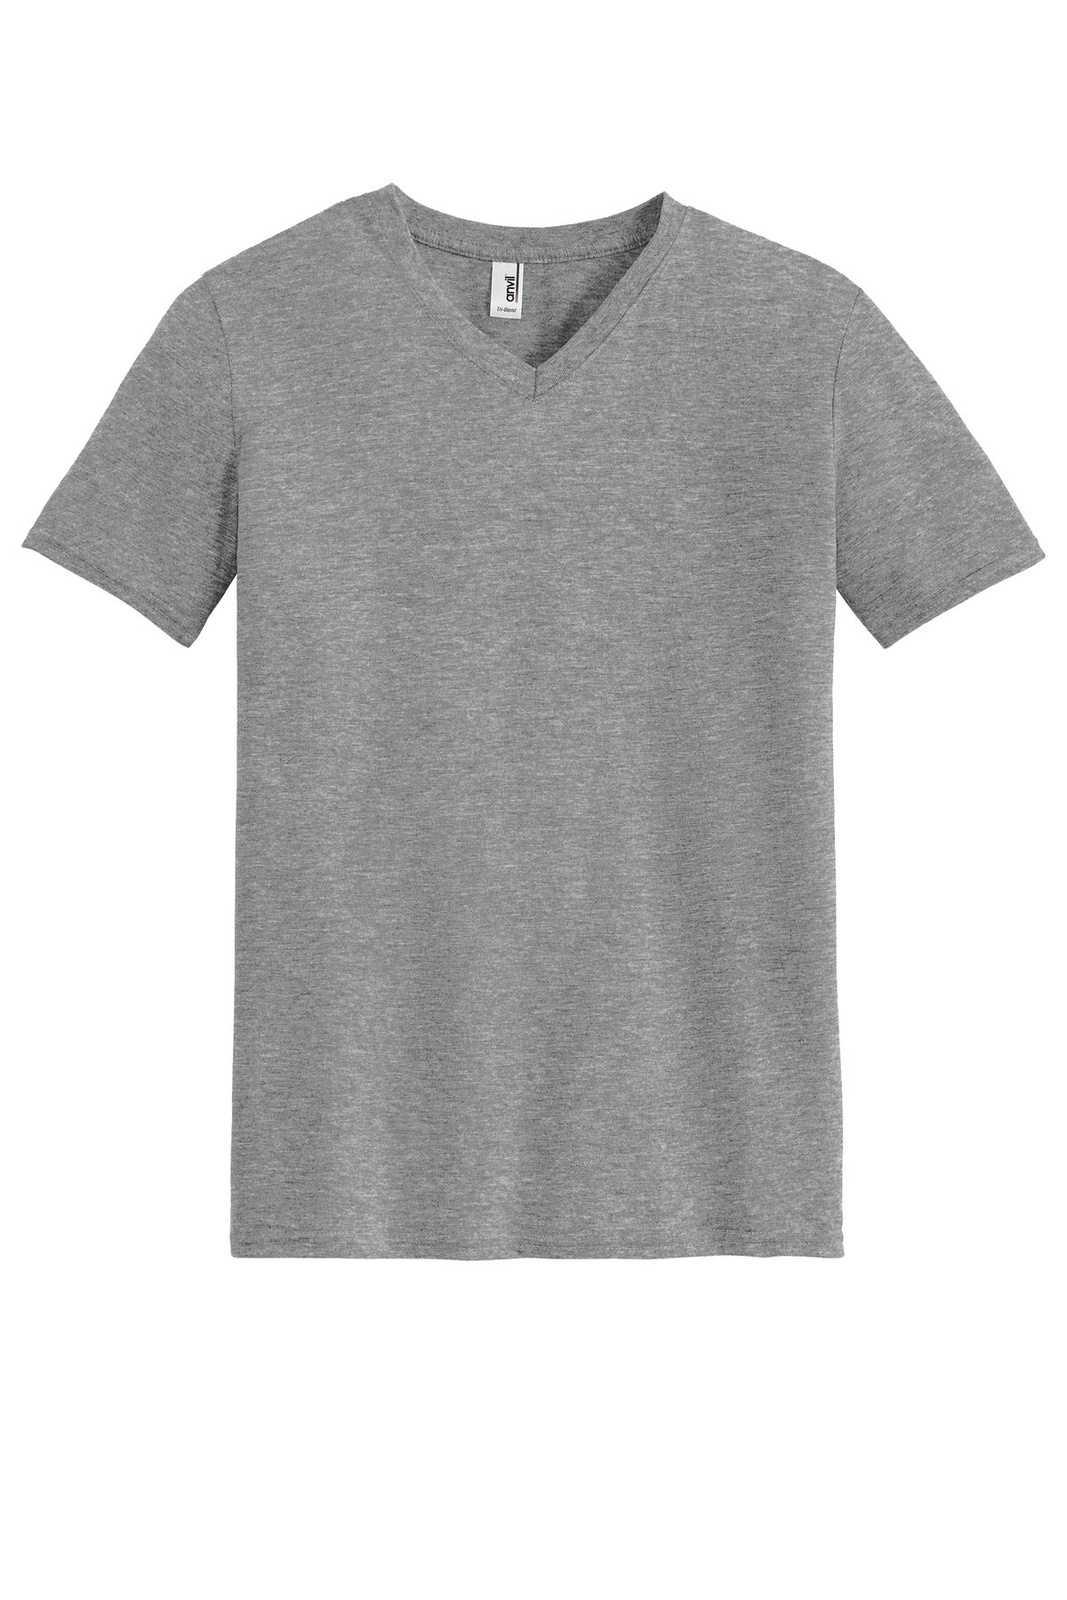 Anvil A6752 Tri-Blend V-Neck Tee - Heather Gray - HIT a Double